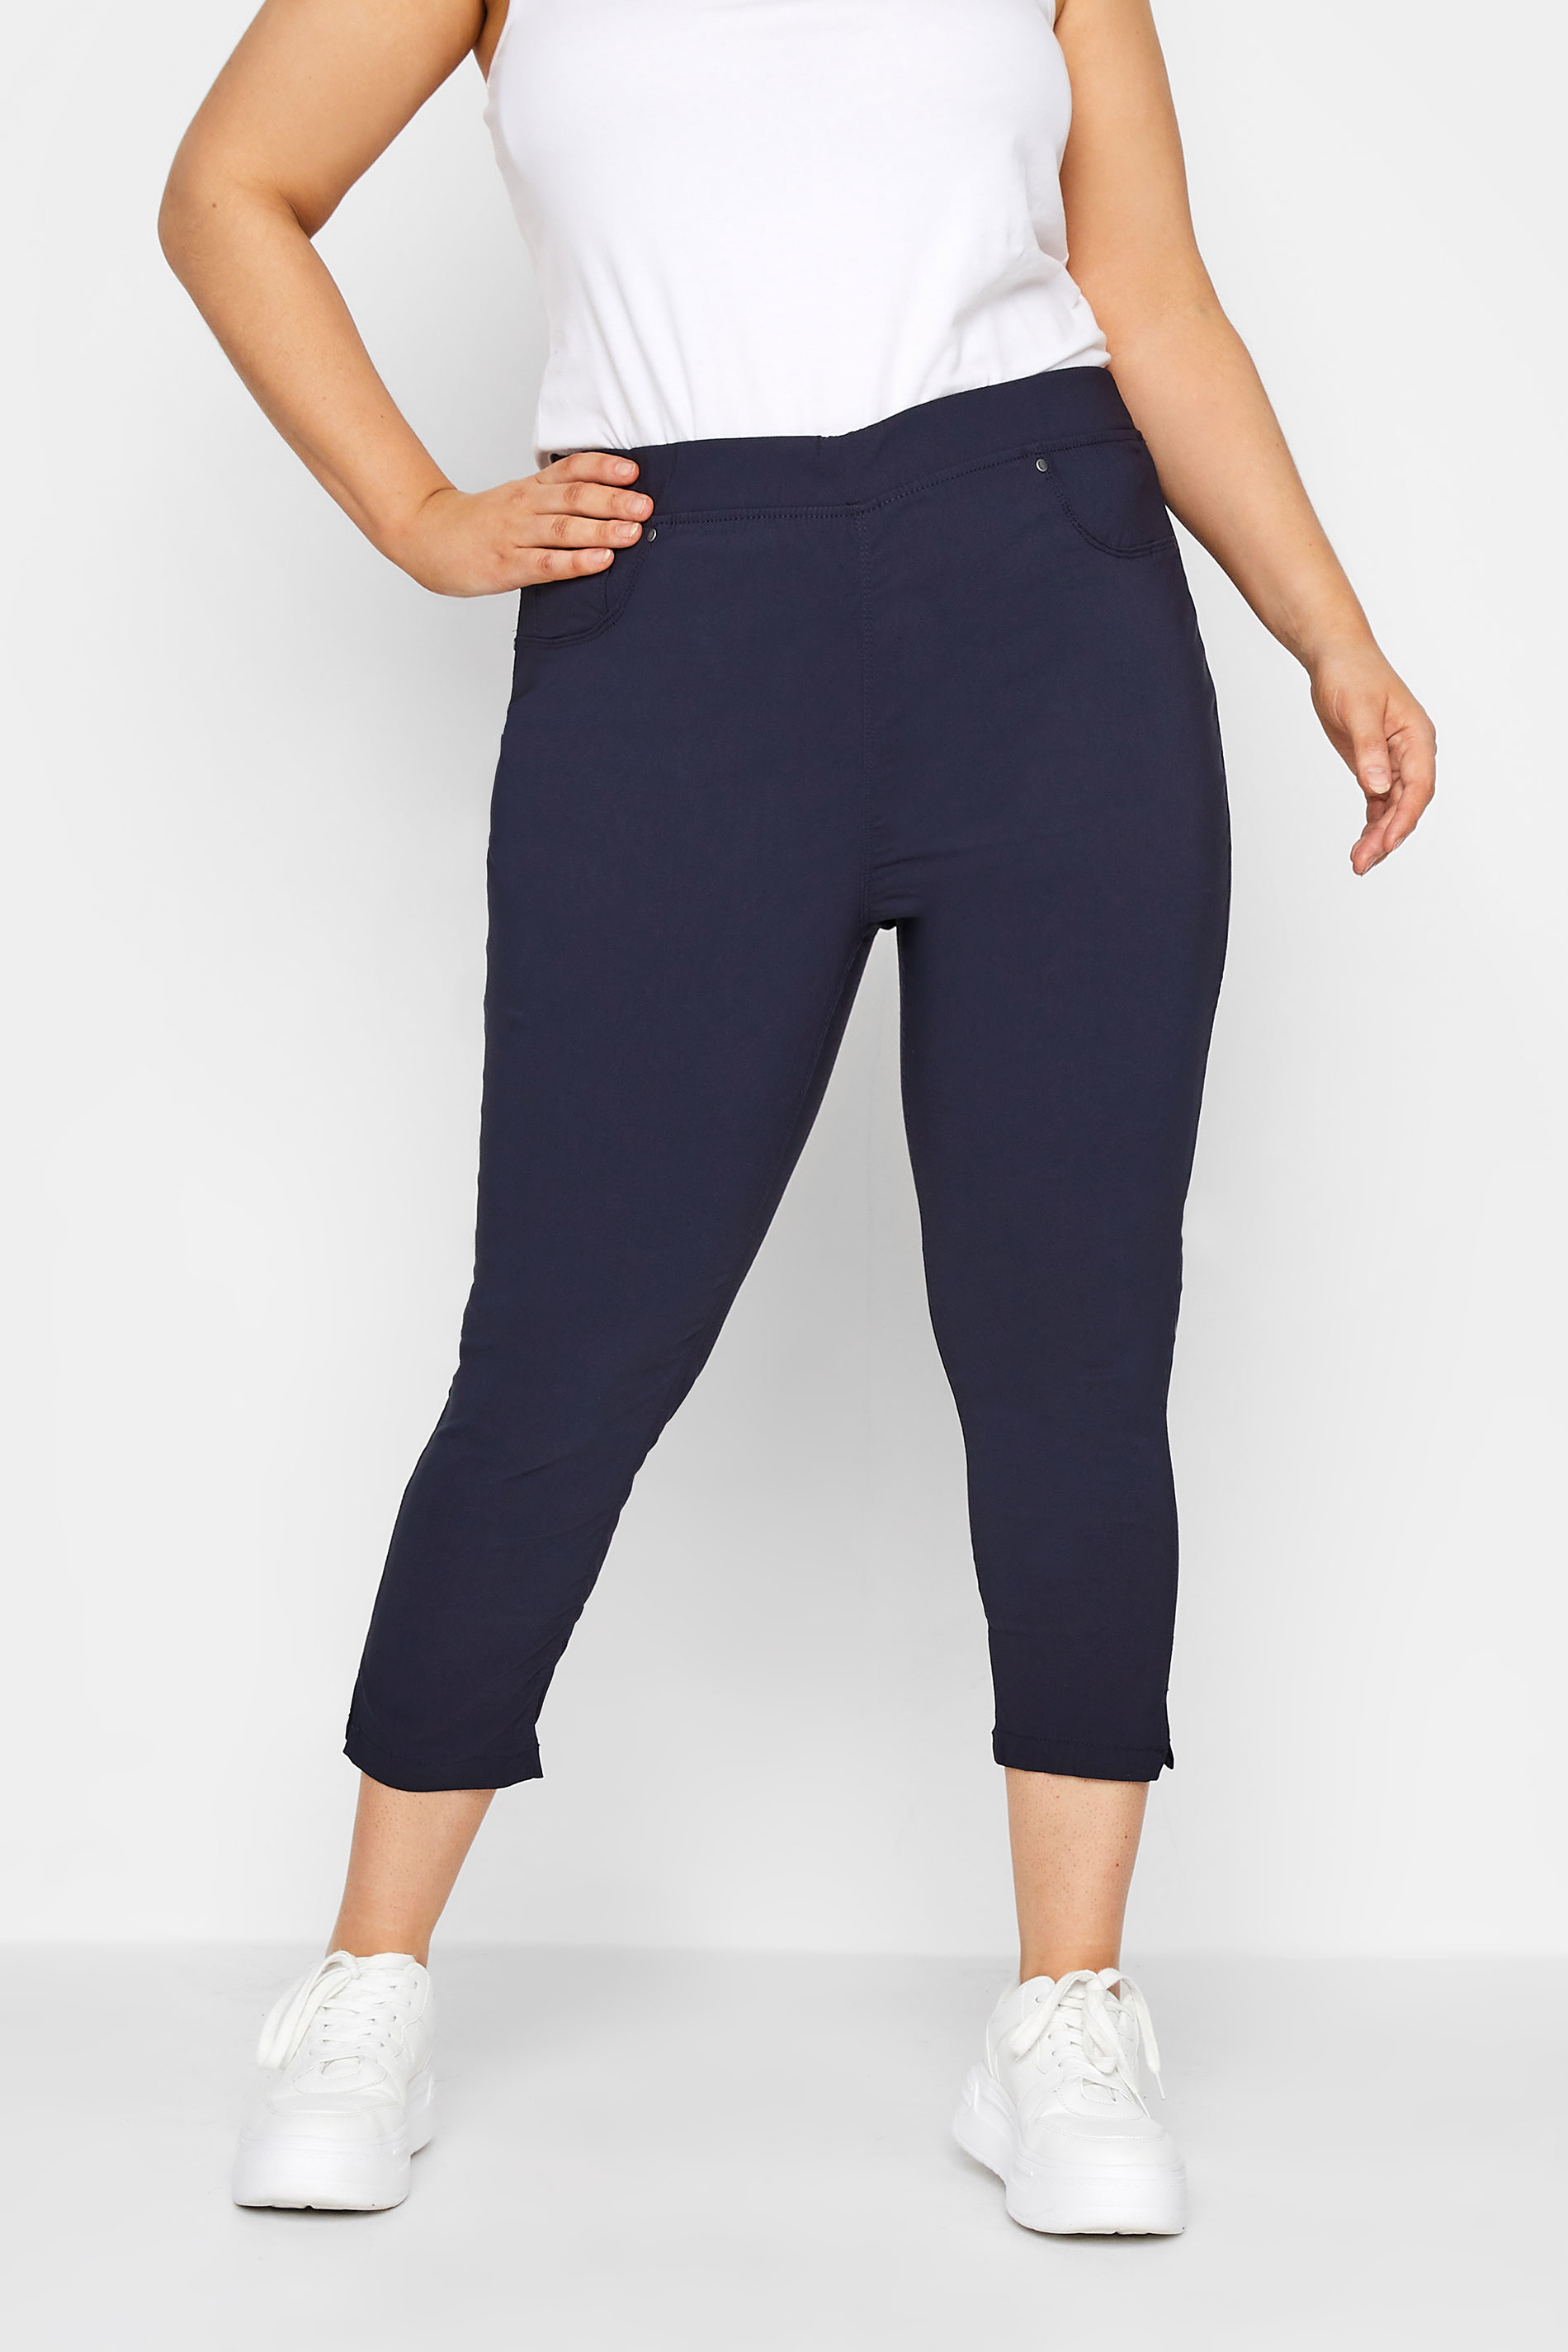 Navy Blue Bengaline Cropped Pull On Trousers, plus size 16 to 36 1